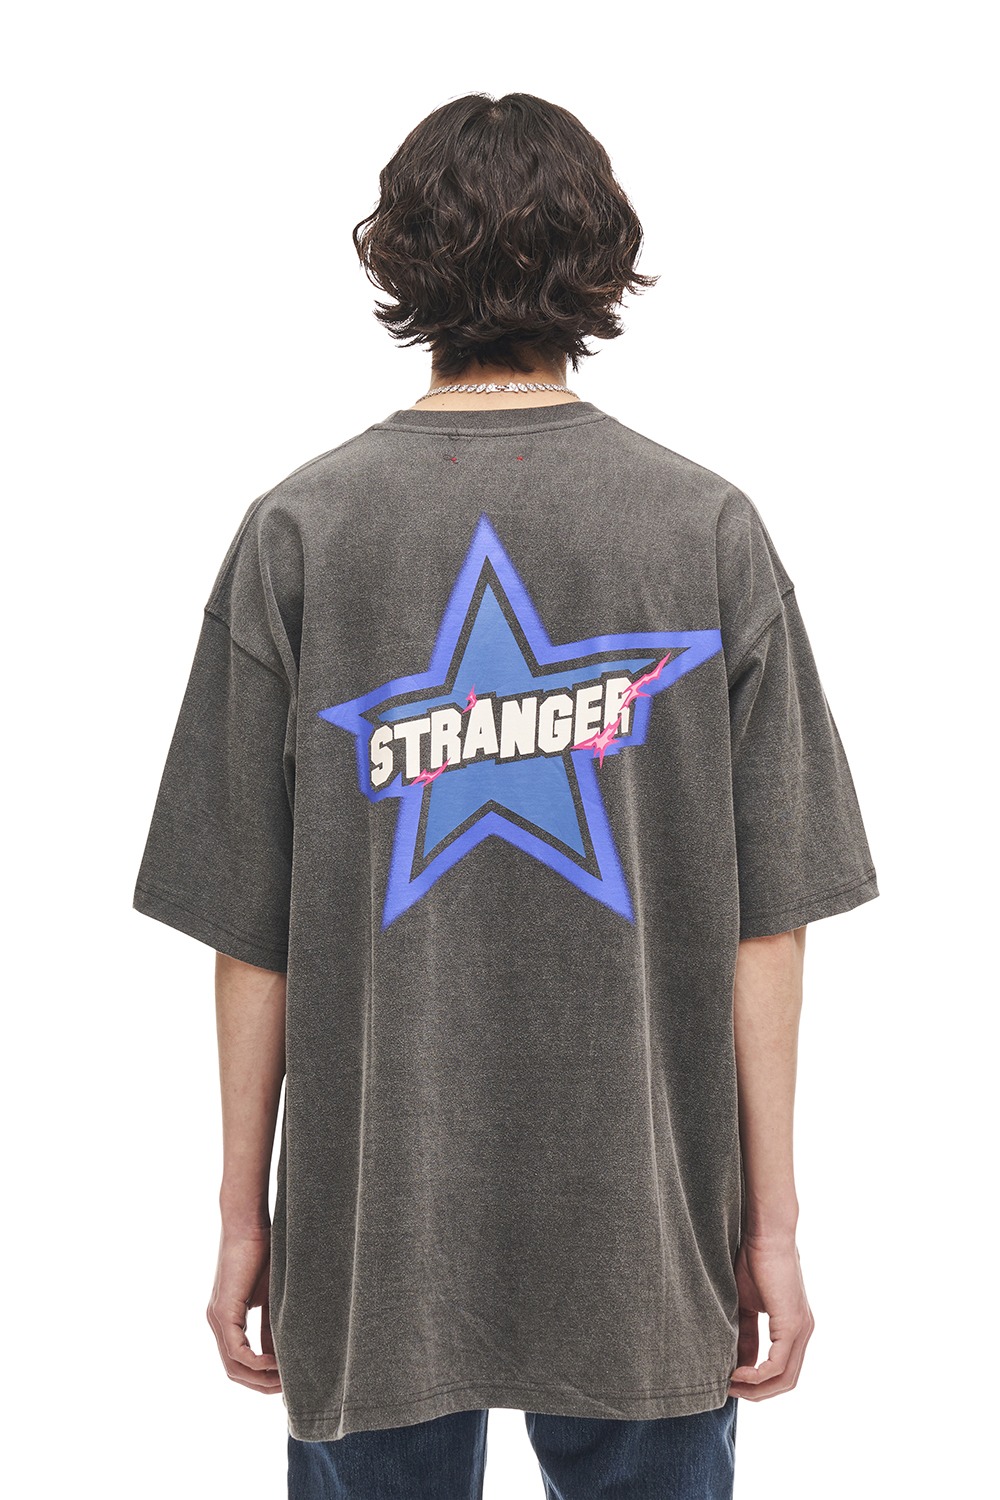 COUNTING STAR T-SHIRTS